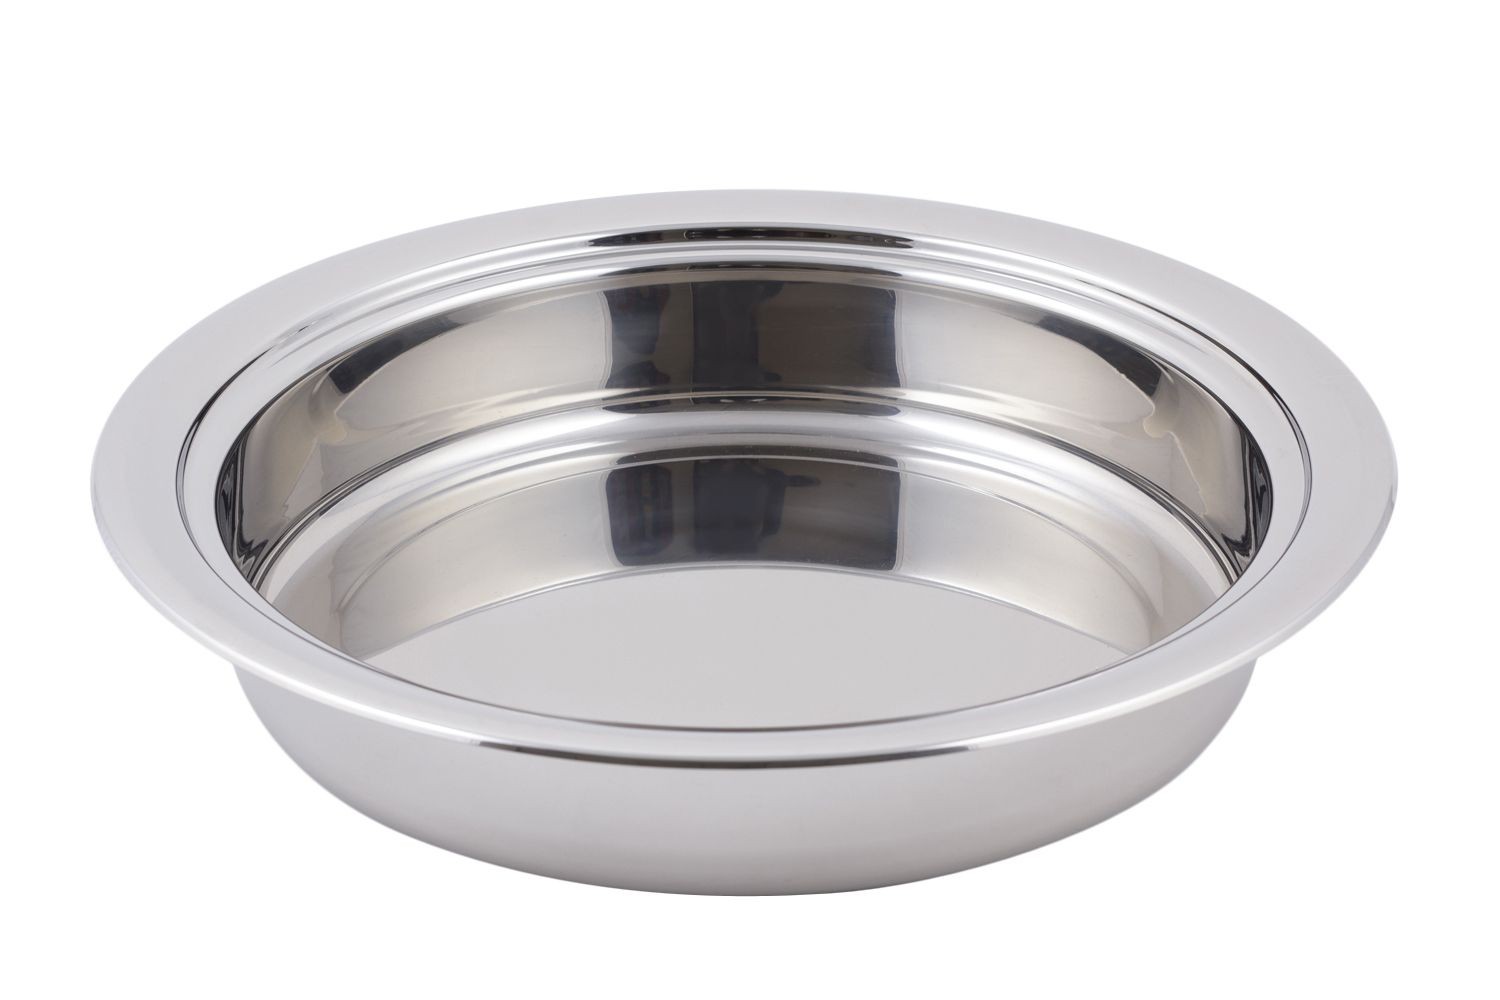 Bon Chef 20101 Stackable Round Food Pan, 17 1/8" Dia., 3 1/8" H.